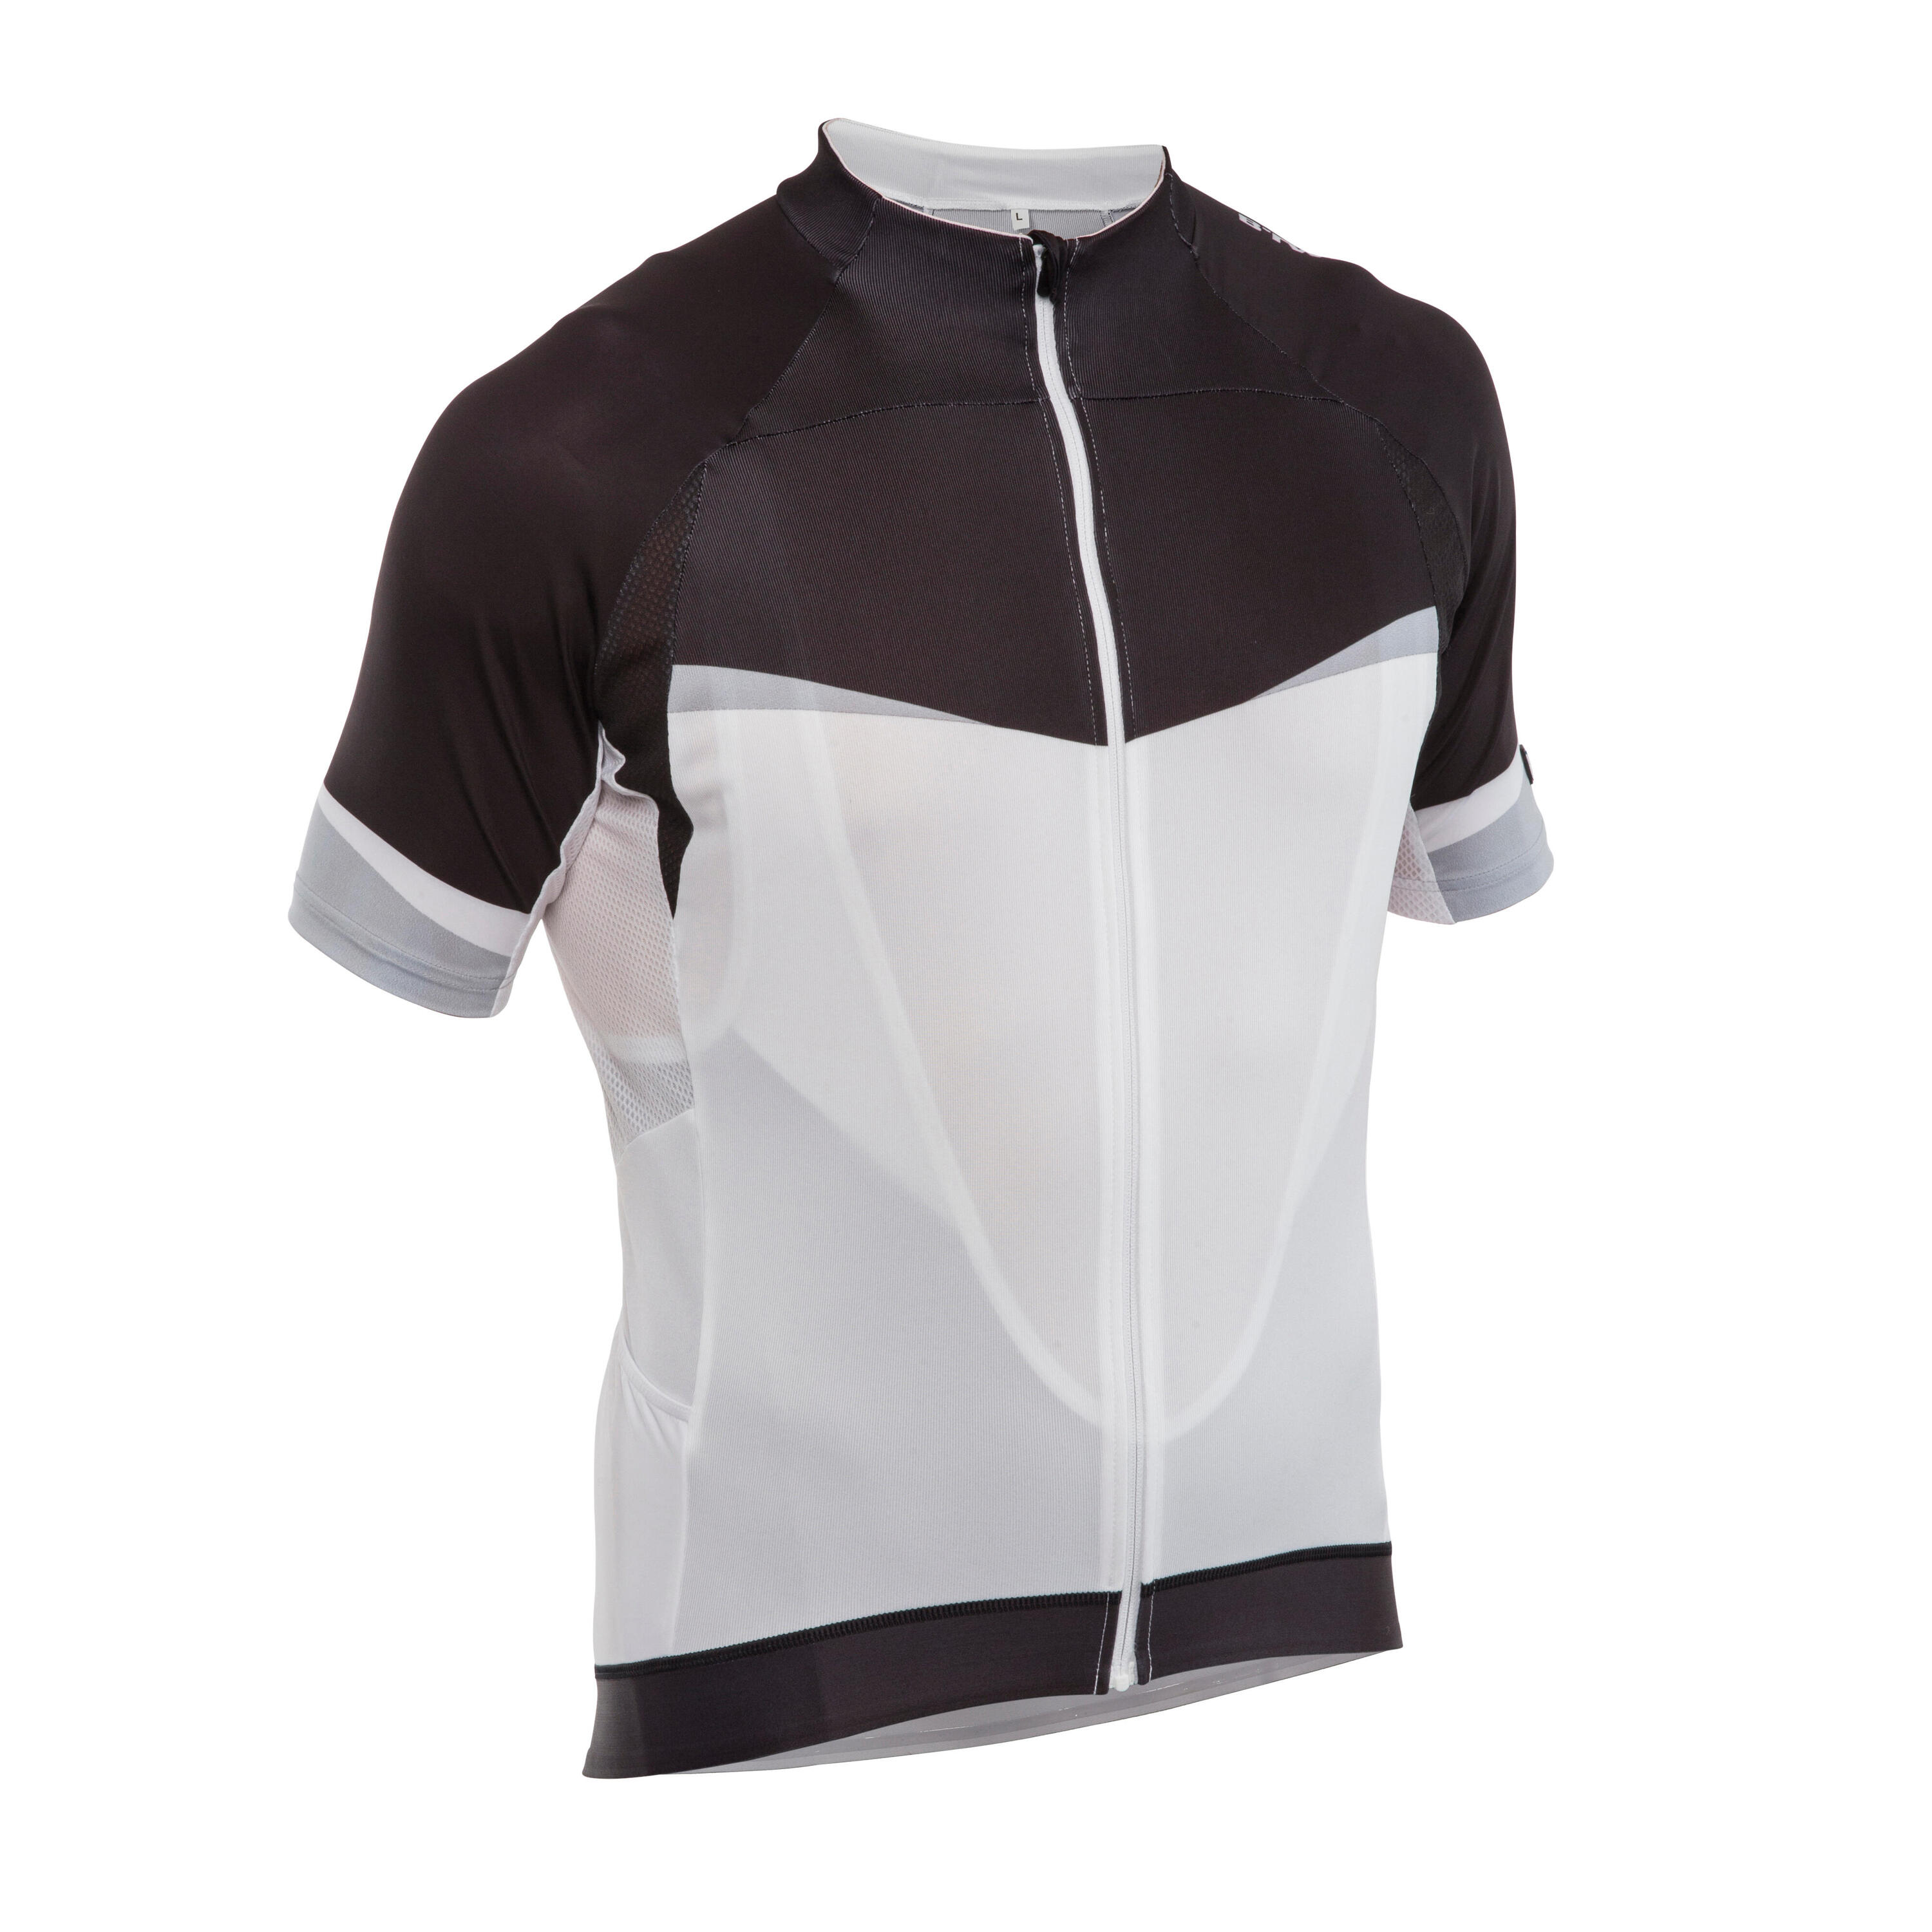 BTWIN 520 SHORT-SLEEVED CYCLING JERSEY - WHITE BLACK